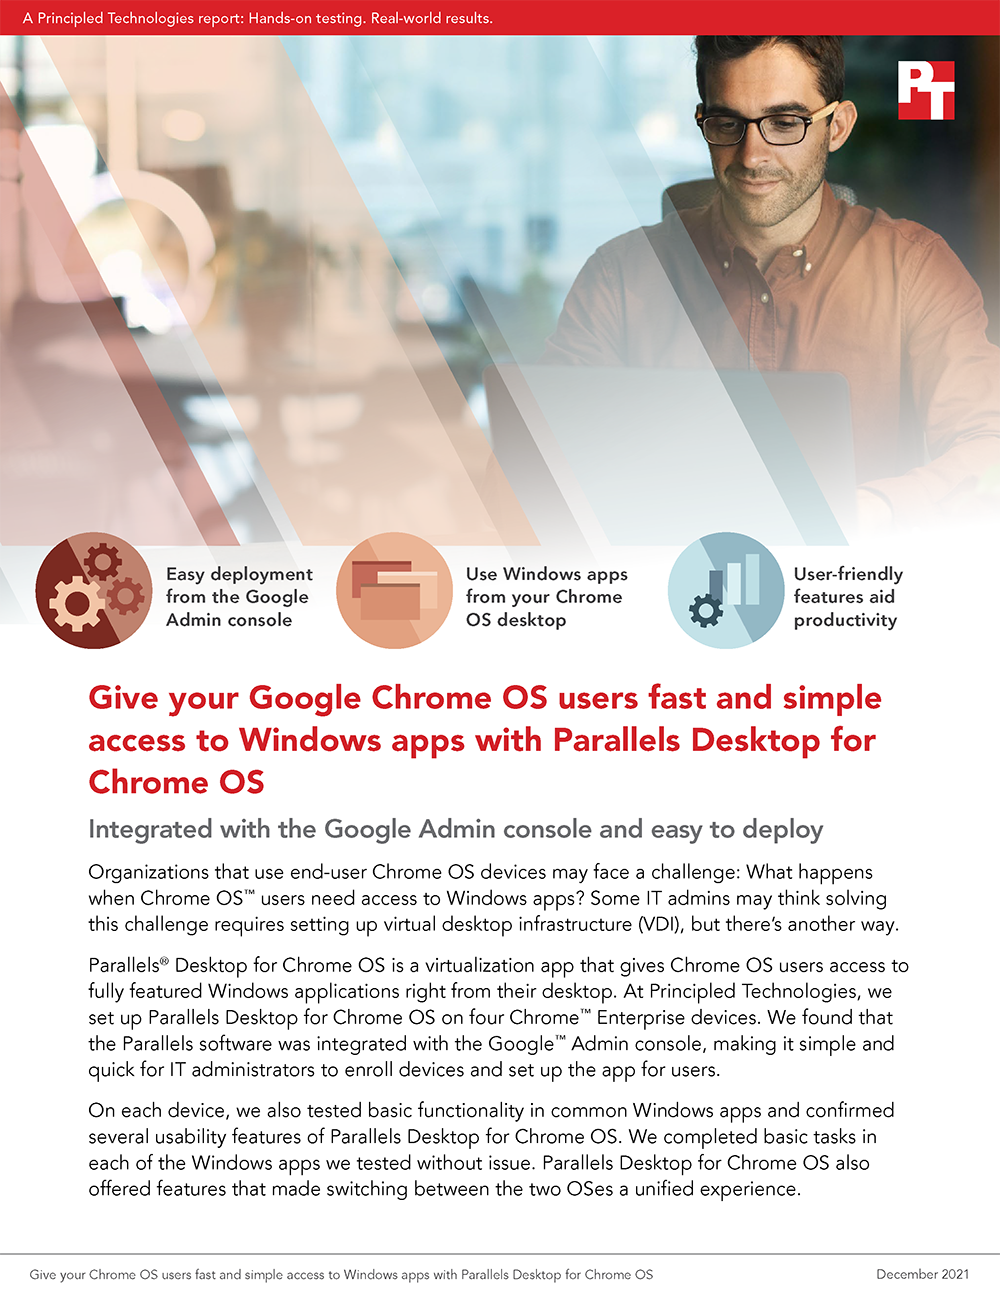 Parallels Desktop for Chrome OS Was a Simple-to-Deploy Solution for Accessing Fully Featured Windows Apps from Chrome OS Devices, in Principled Technologies Testing